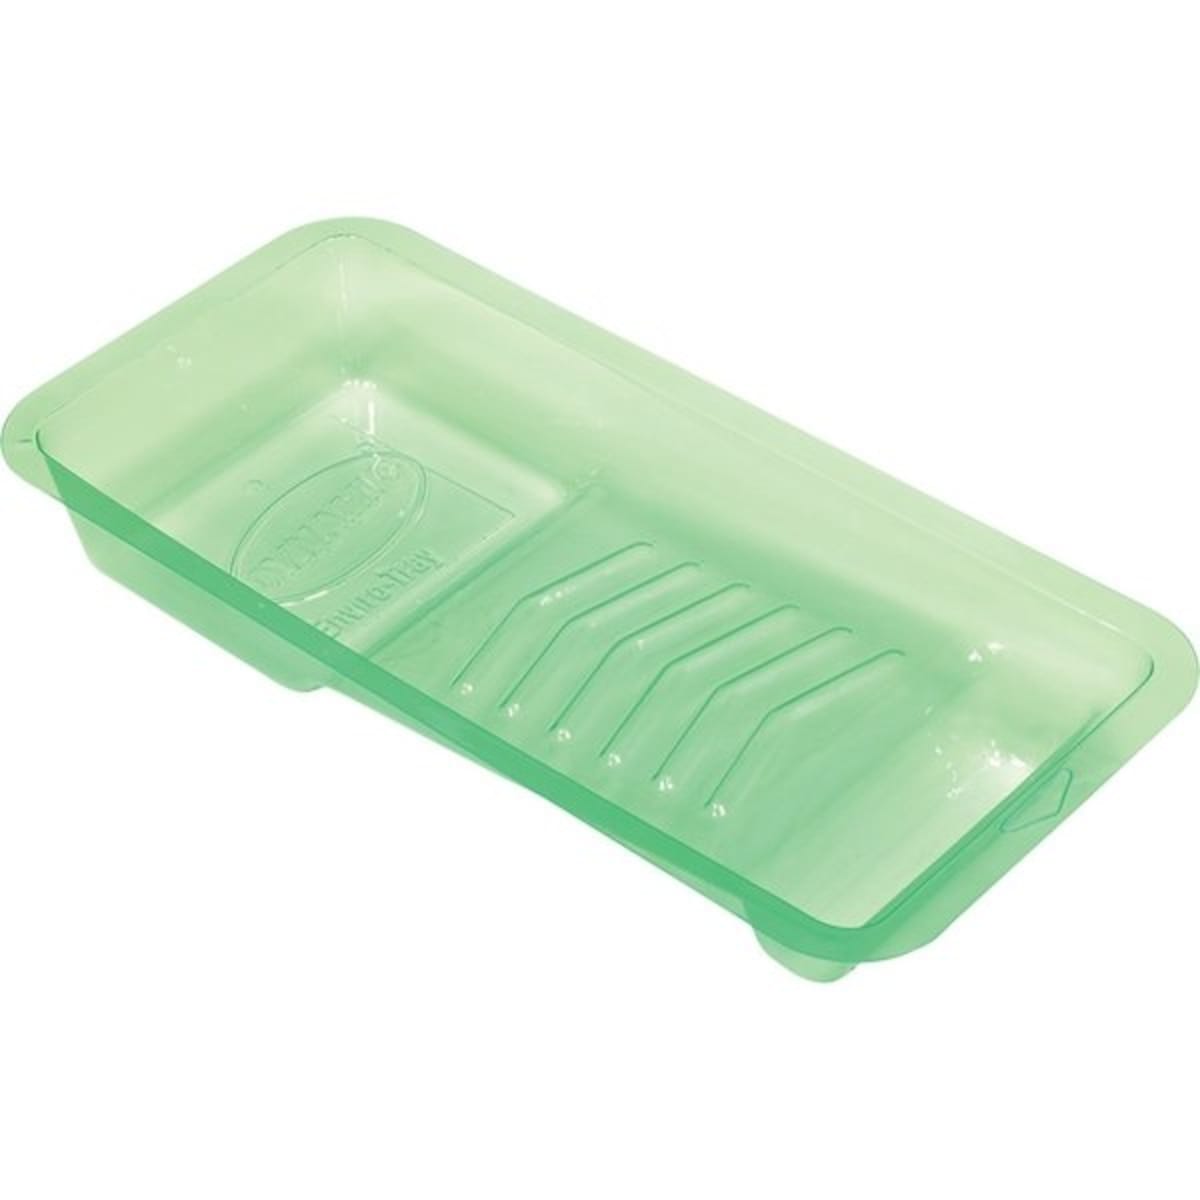 ArroWorthy Green Plastic Disposable Paint Trays for 9 Inch Rollers